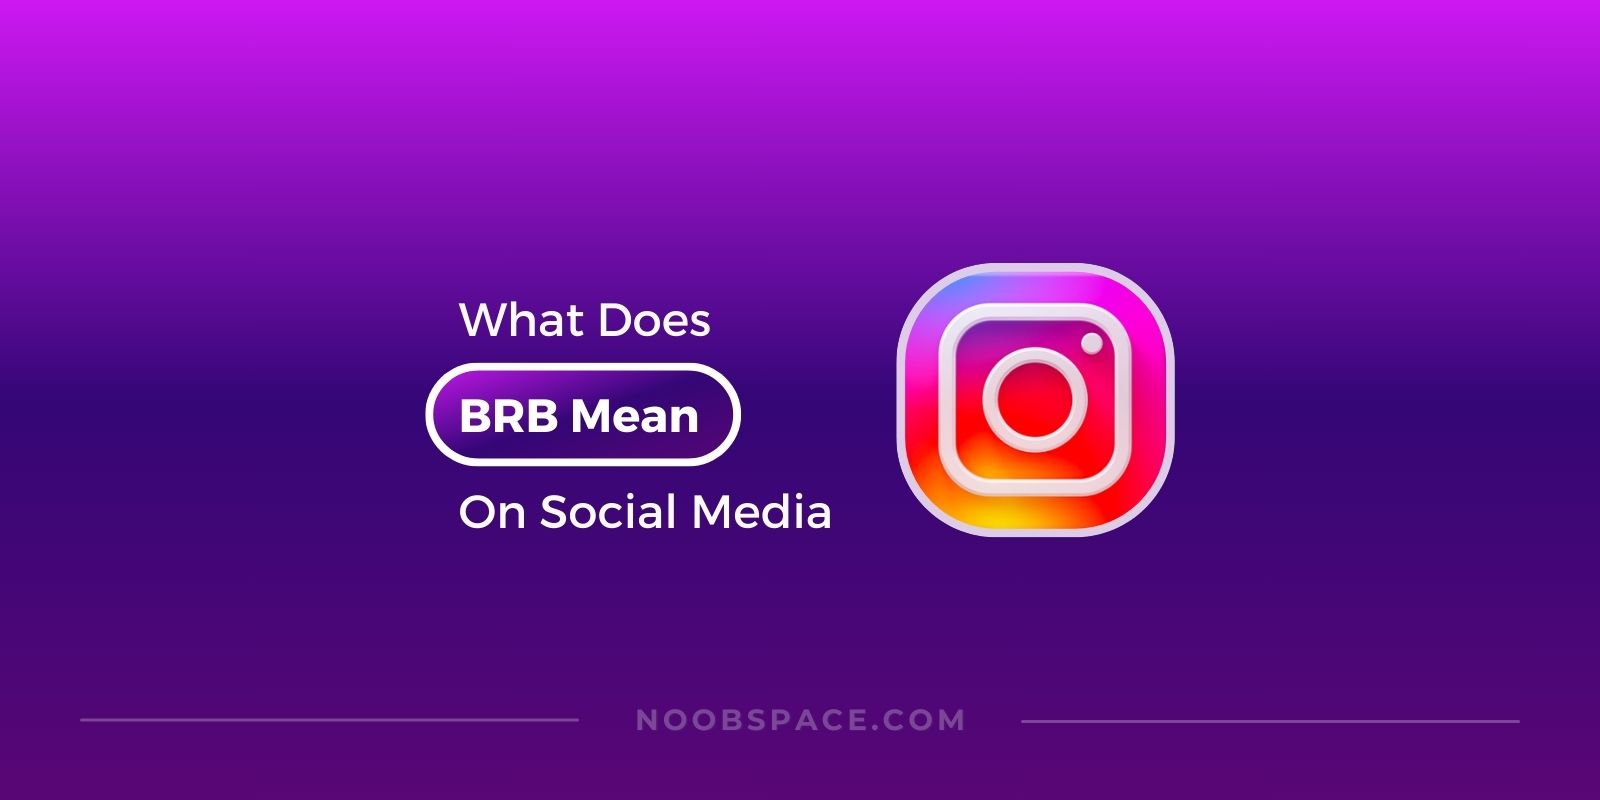 What Does BRB Mean On Social Media?